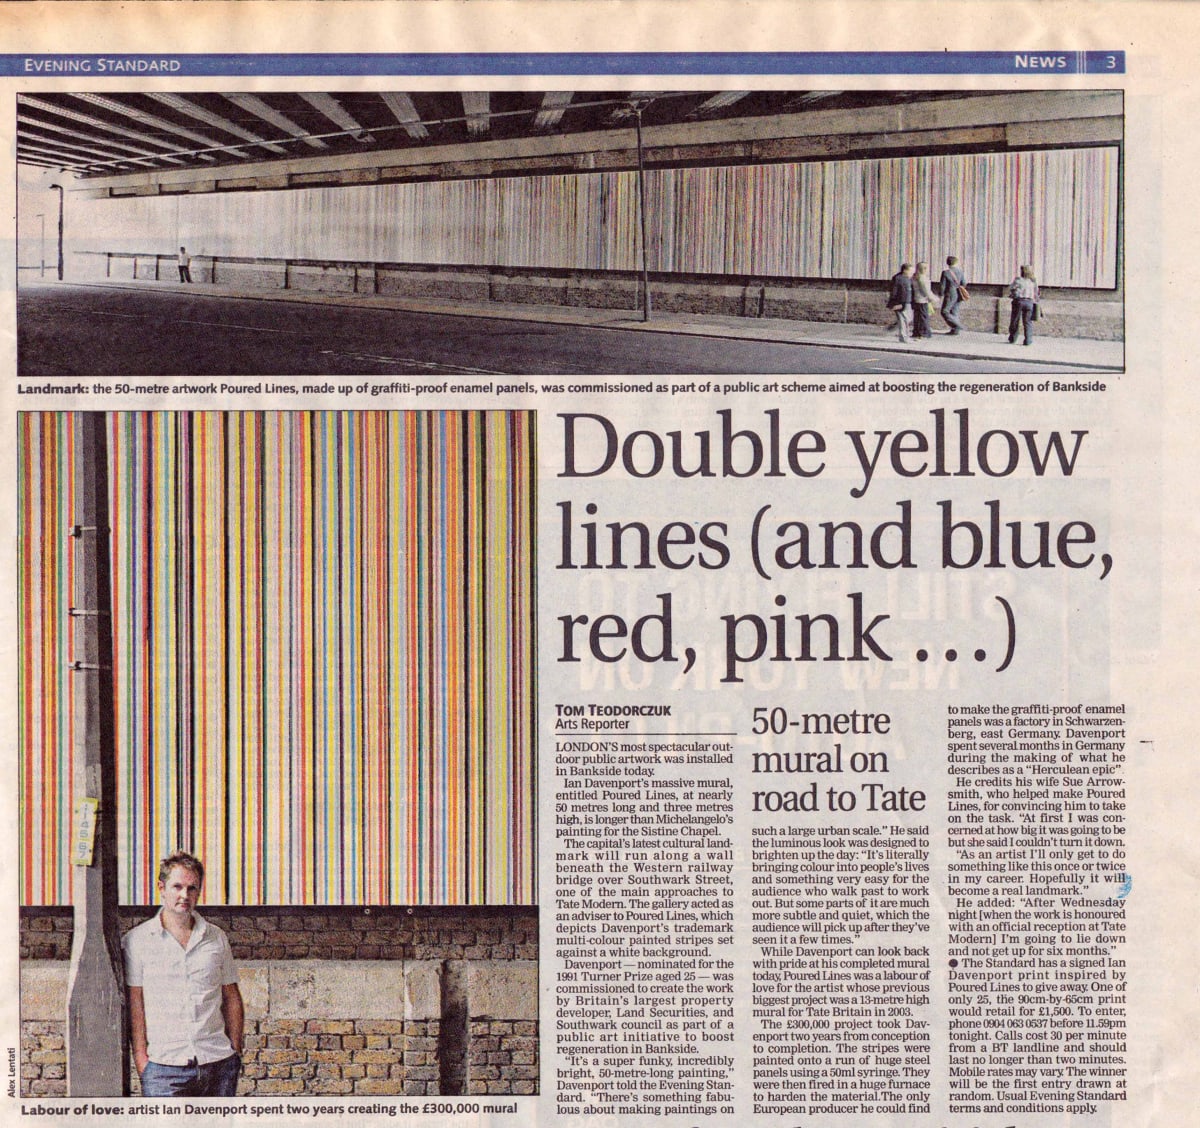 Double yellow lines (and blue, red, pink...)